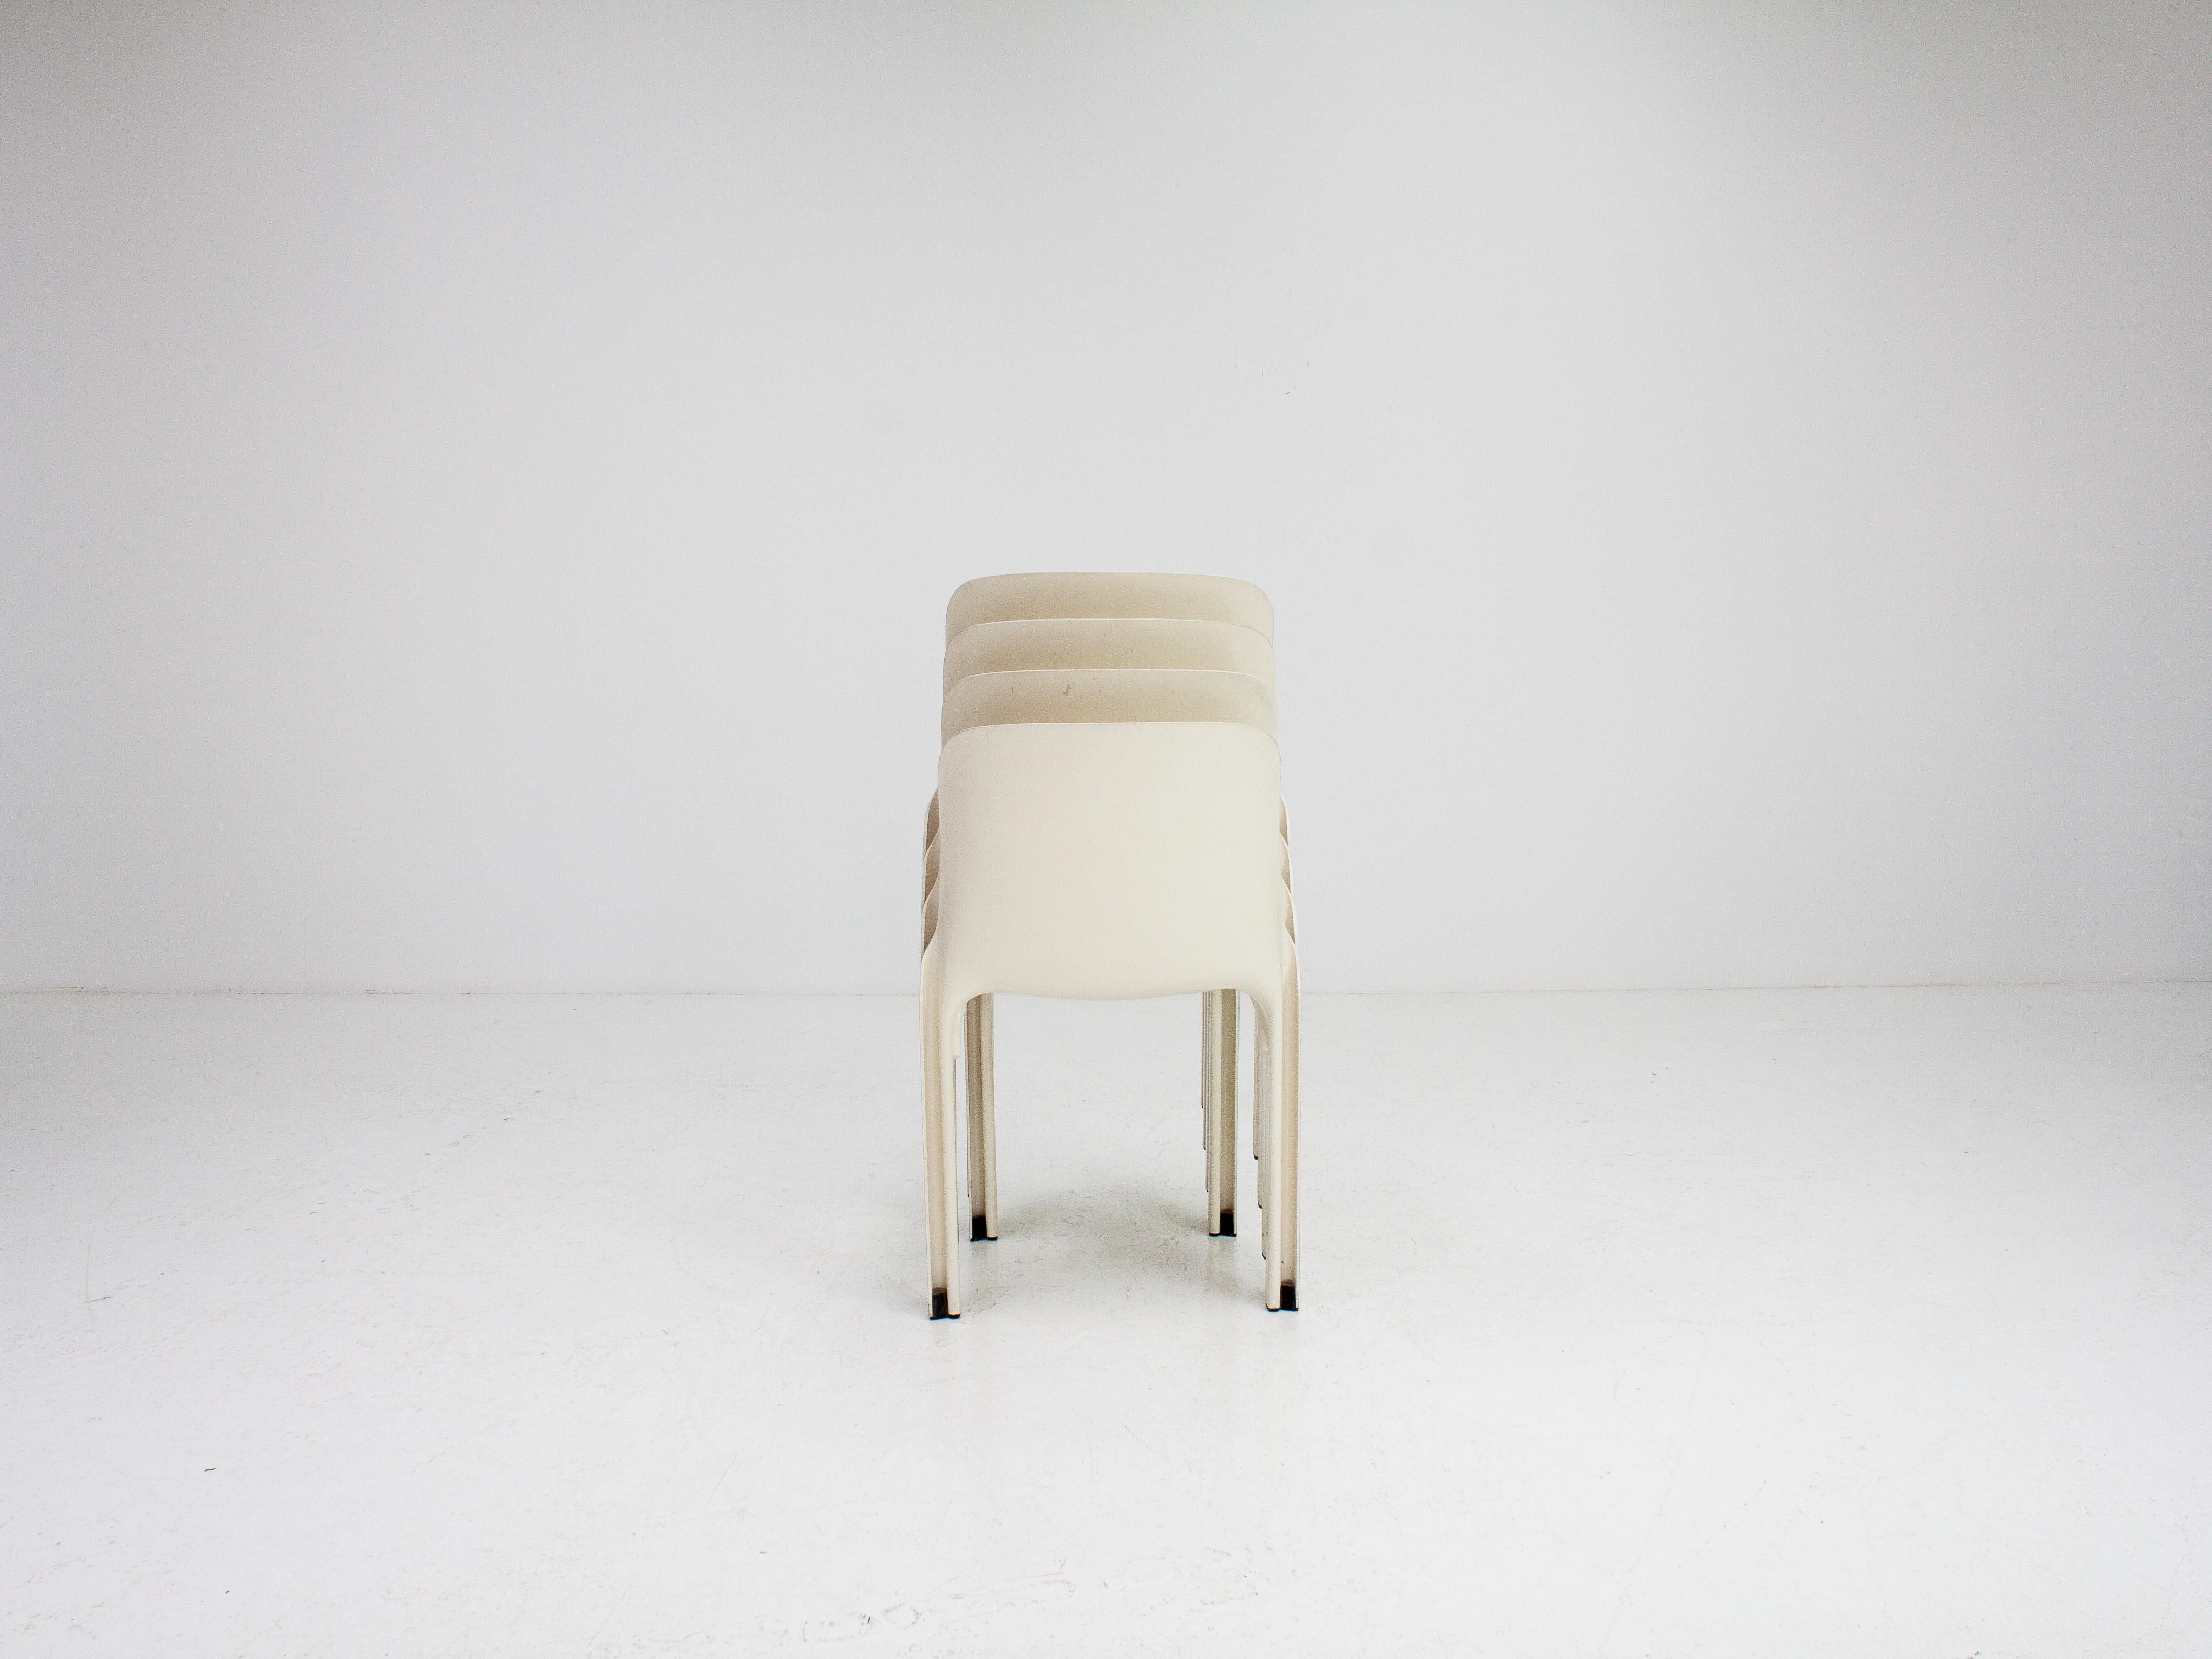 20th Century 'Selene' Stacking Chairs in White by Vico Magistretti for Artemide, 1969